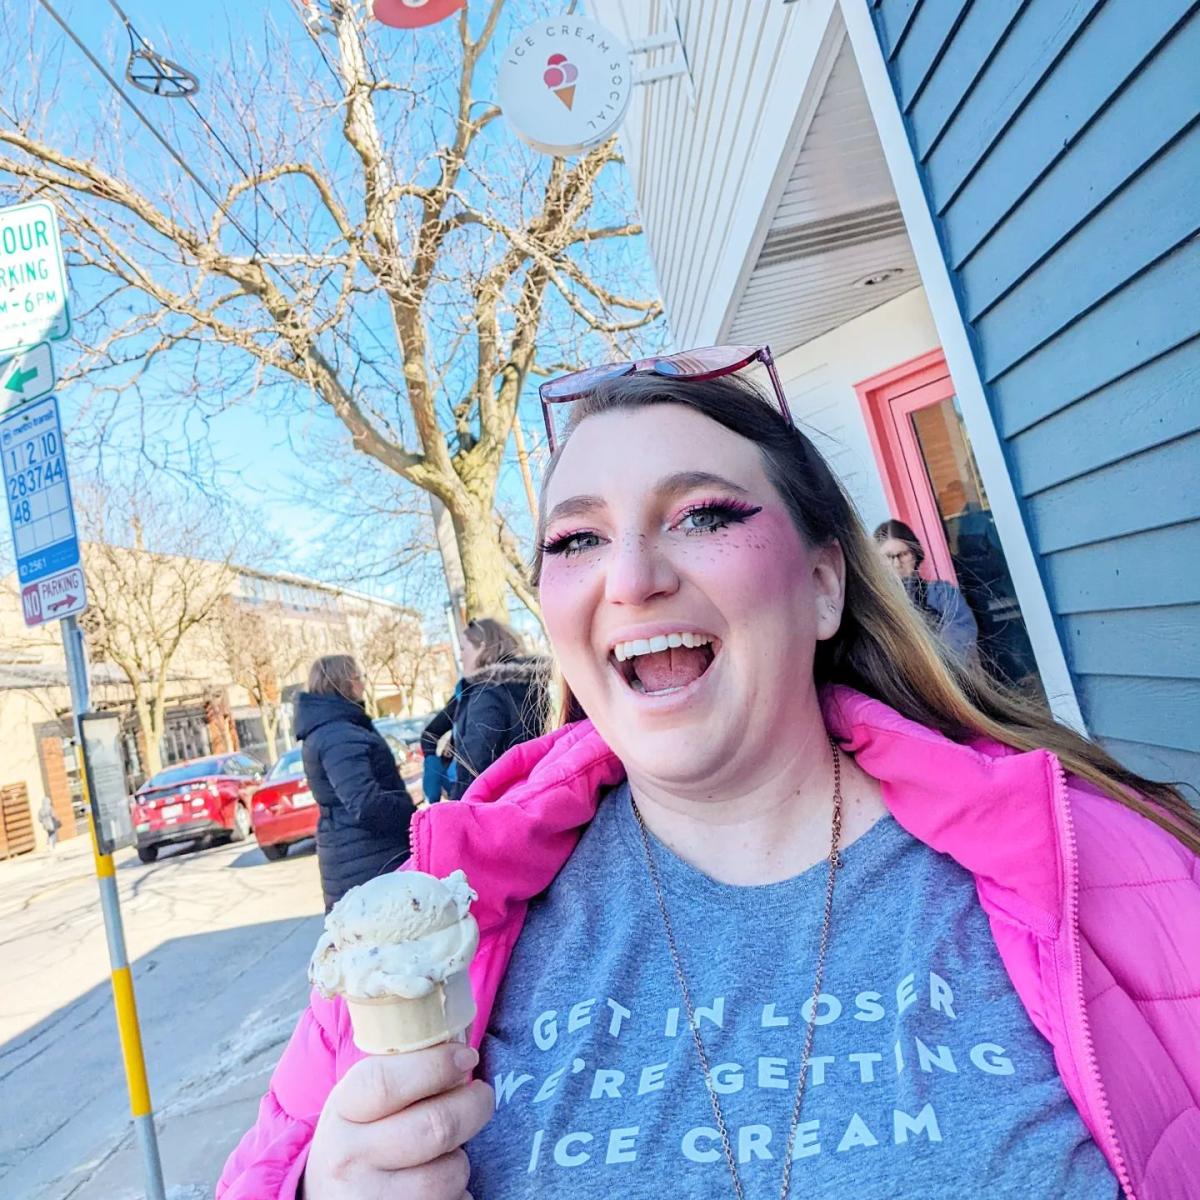 A white woman with bright makeup on and sunglasses on her head smiles widely while carrying an ice cream cone outside of Ice Cream Social